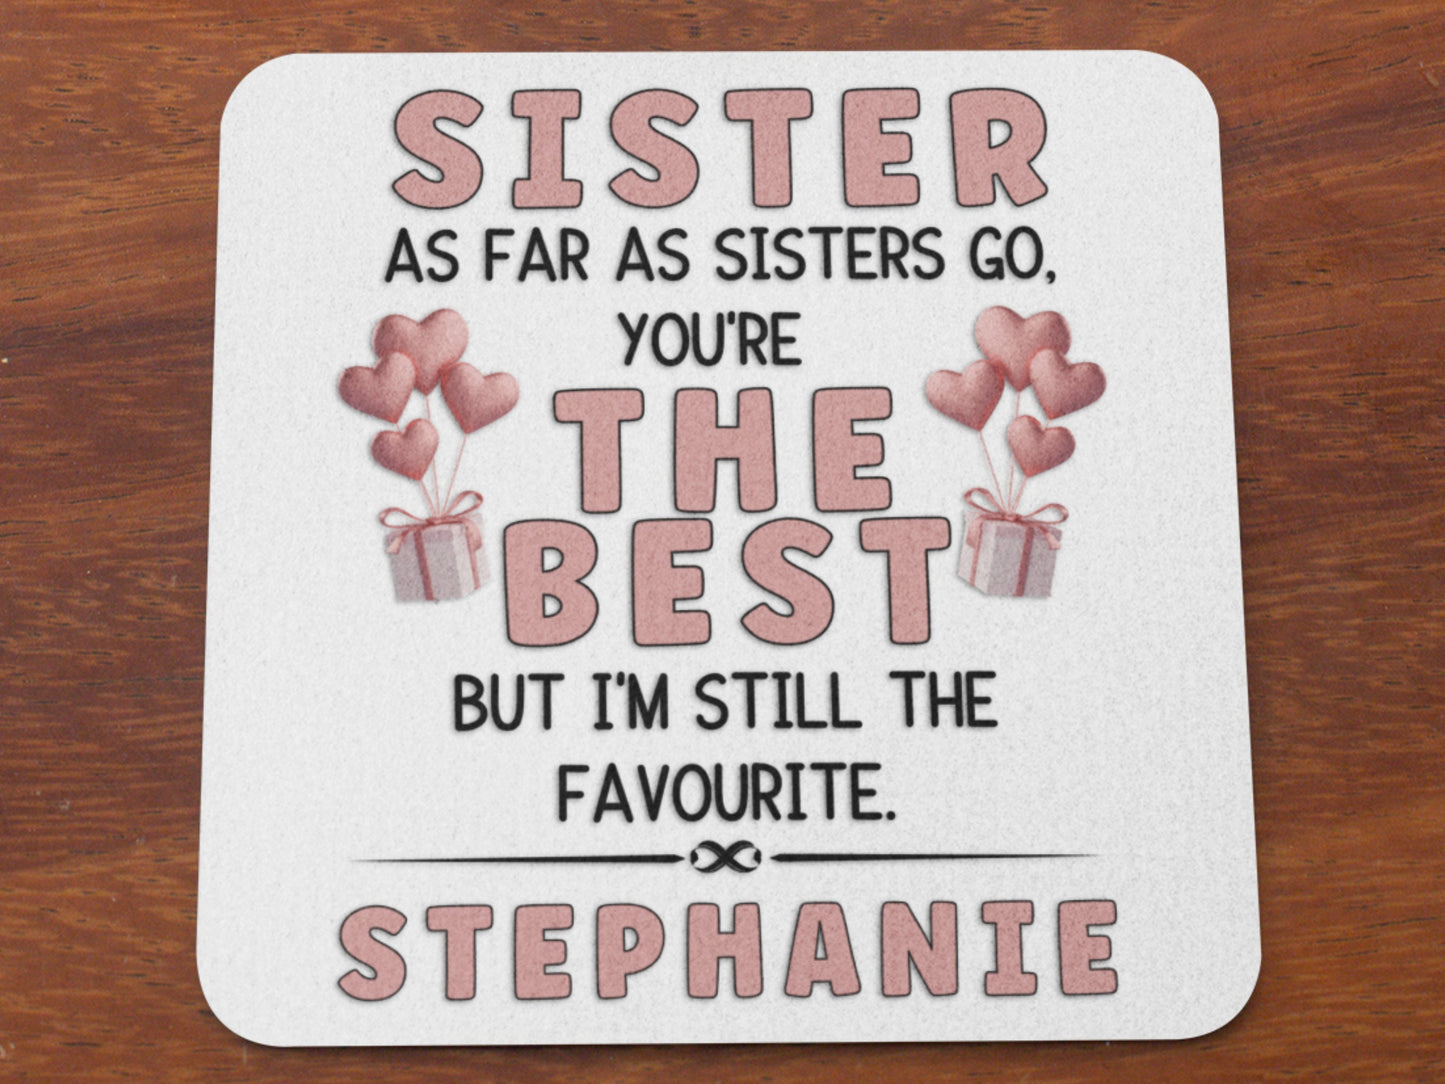 You're the best sister but I'm the favourite funny personalised mug